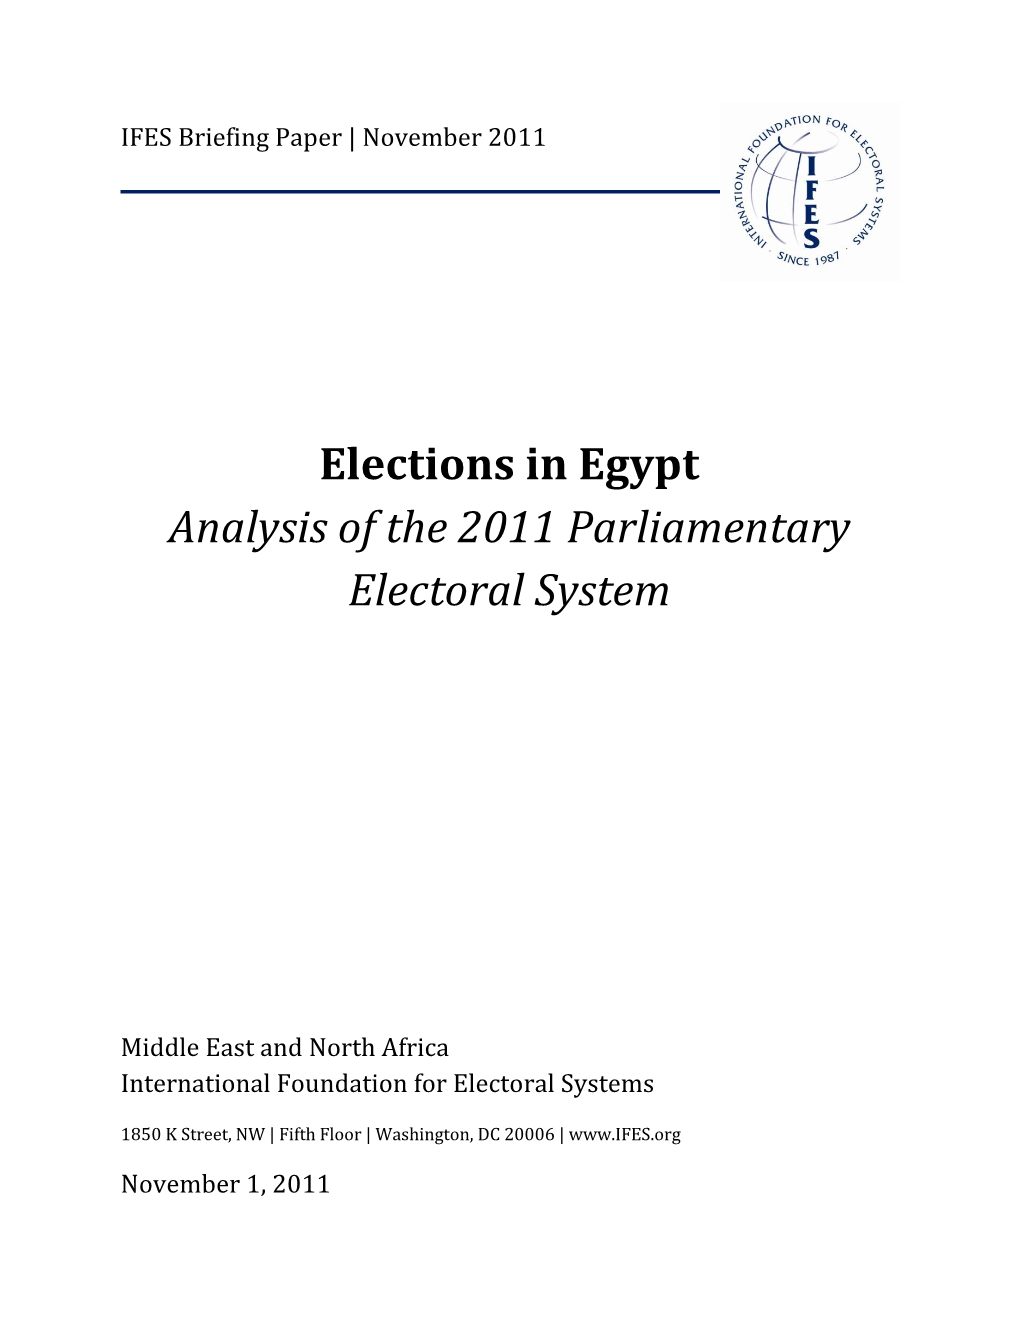 Elections in Egypt Analysis of the 2011 Parliamentary Electoral System